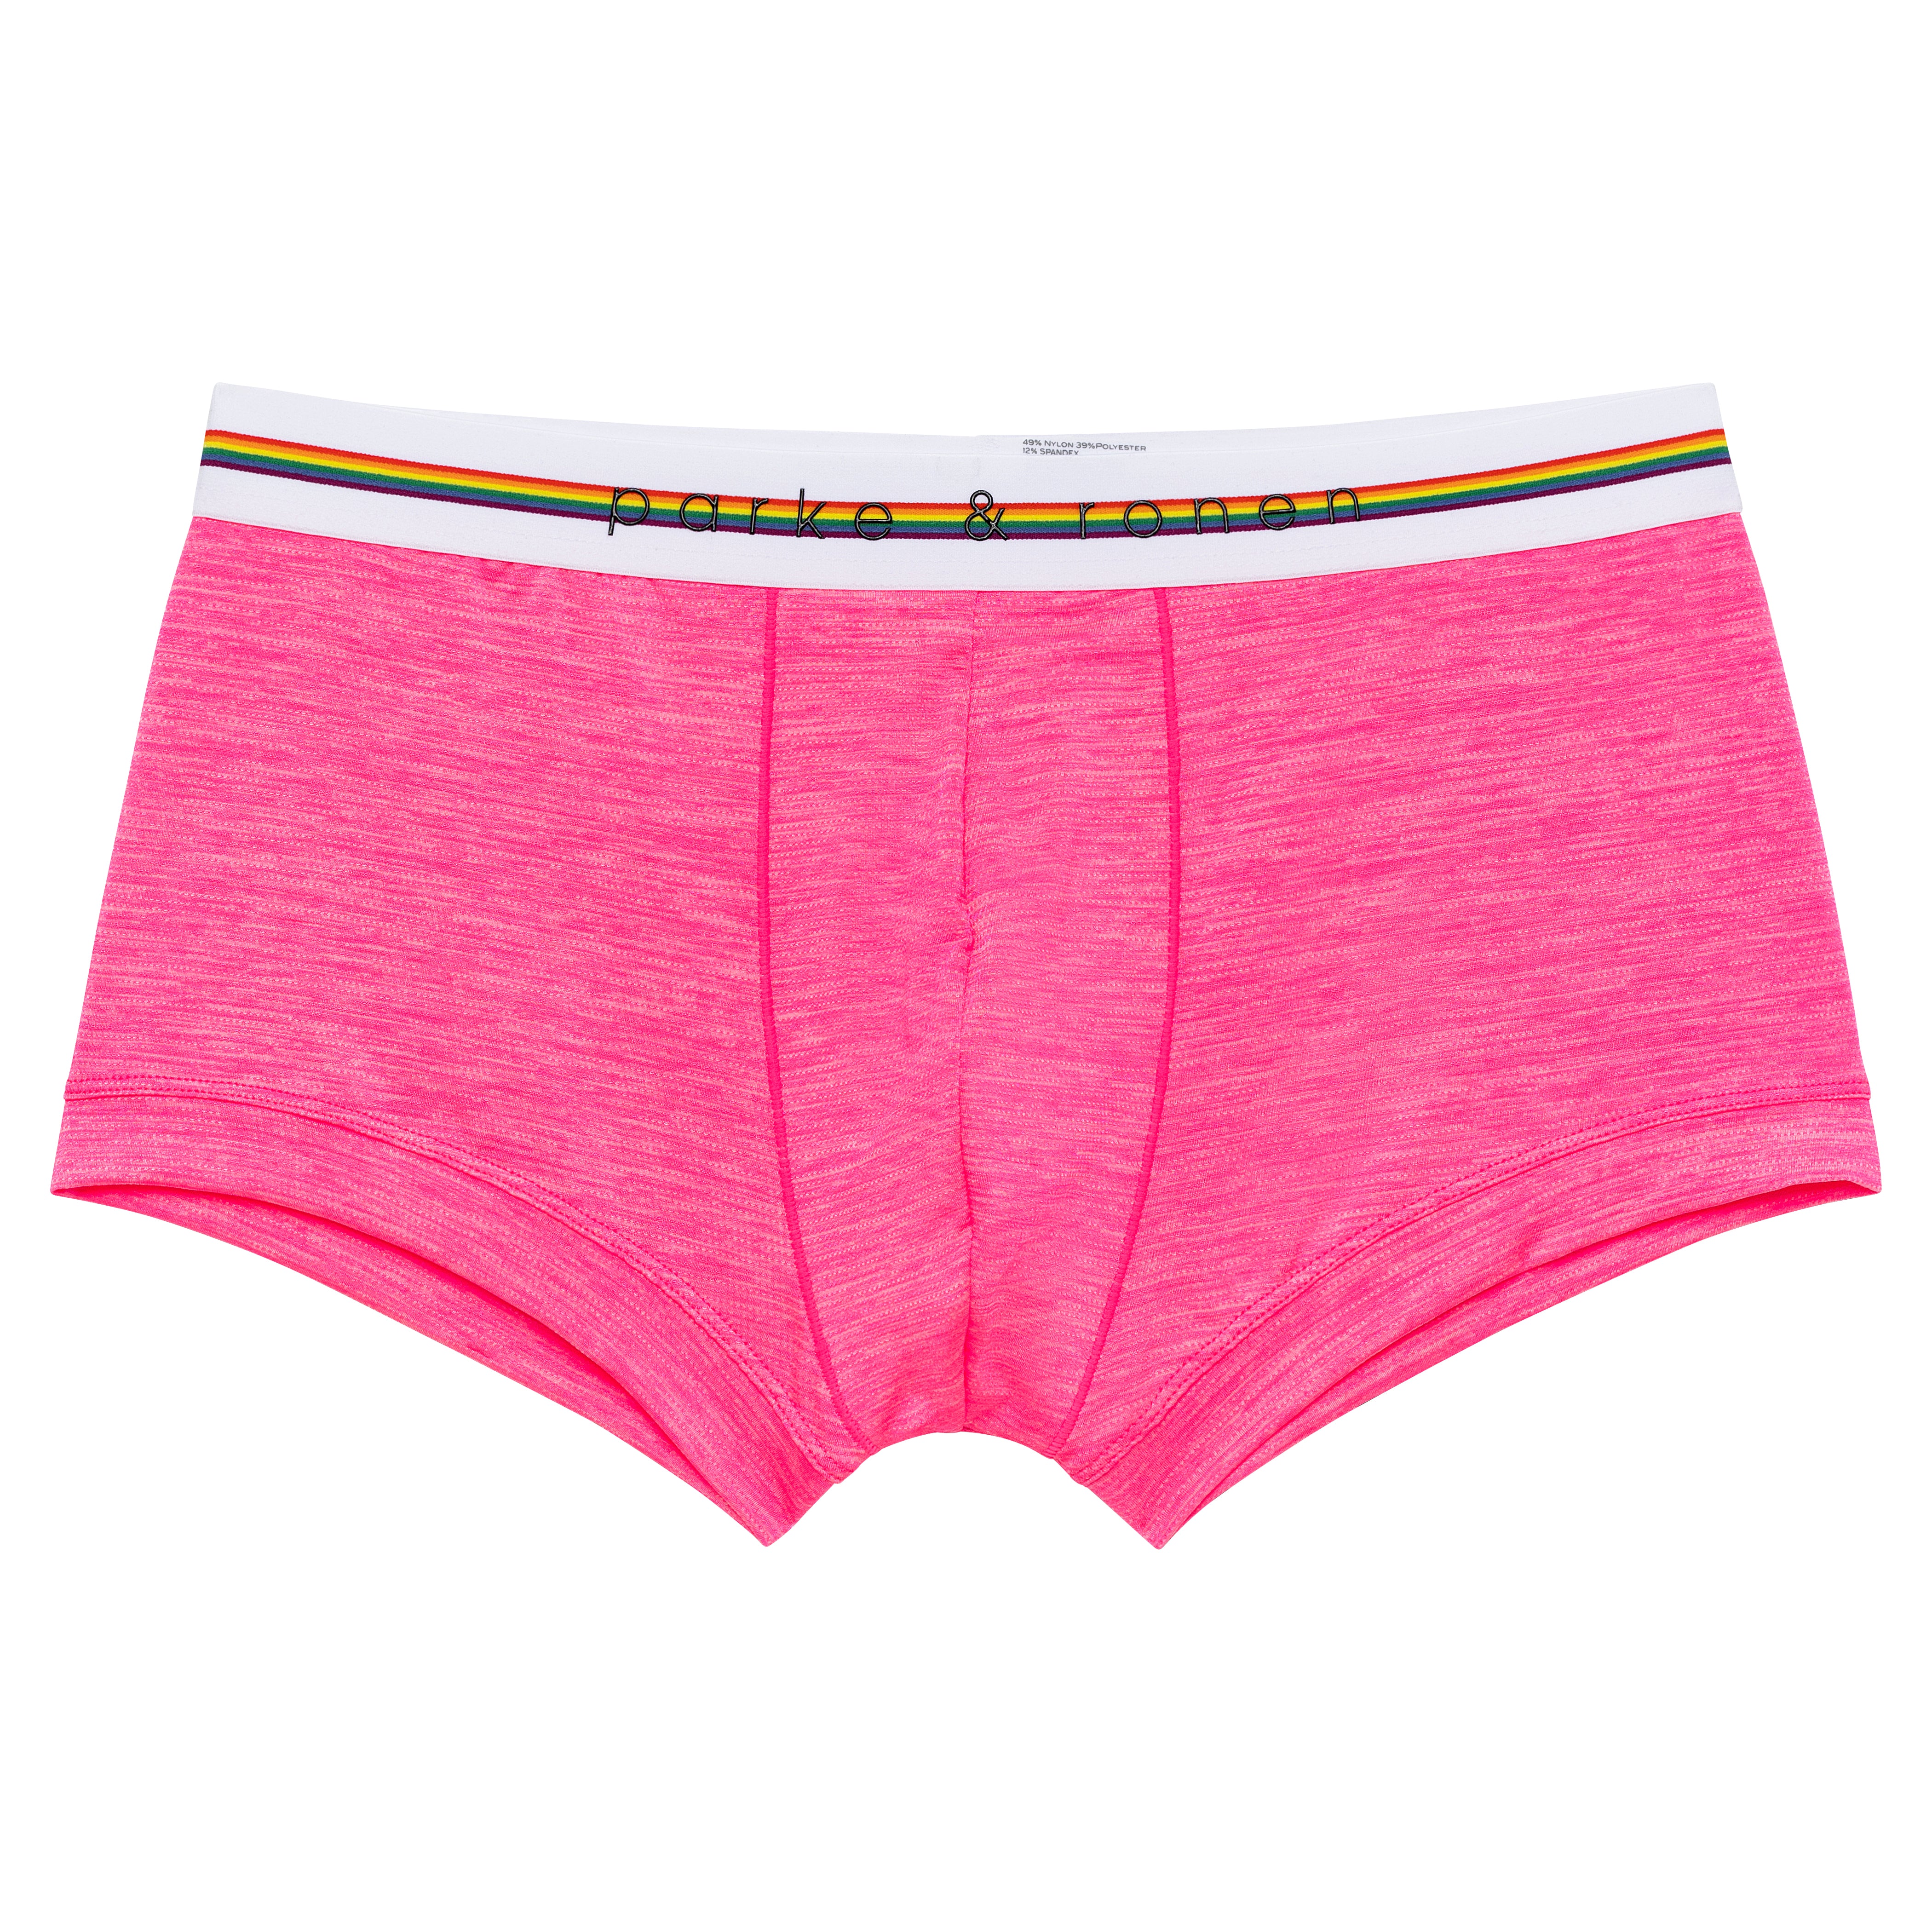 SAVE 50%- LIMITED PRIDE EDITION- Barbie Pink Heather Mesh Low Rise Trunk